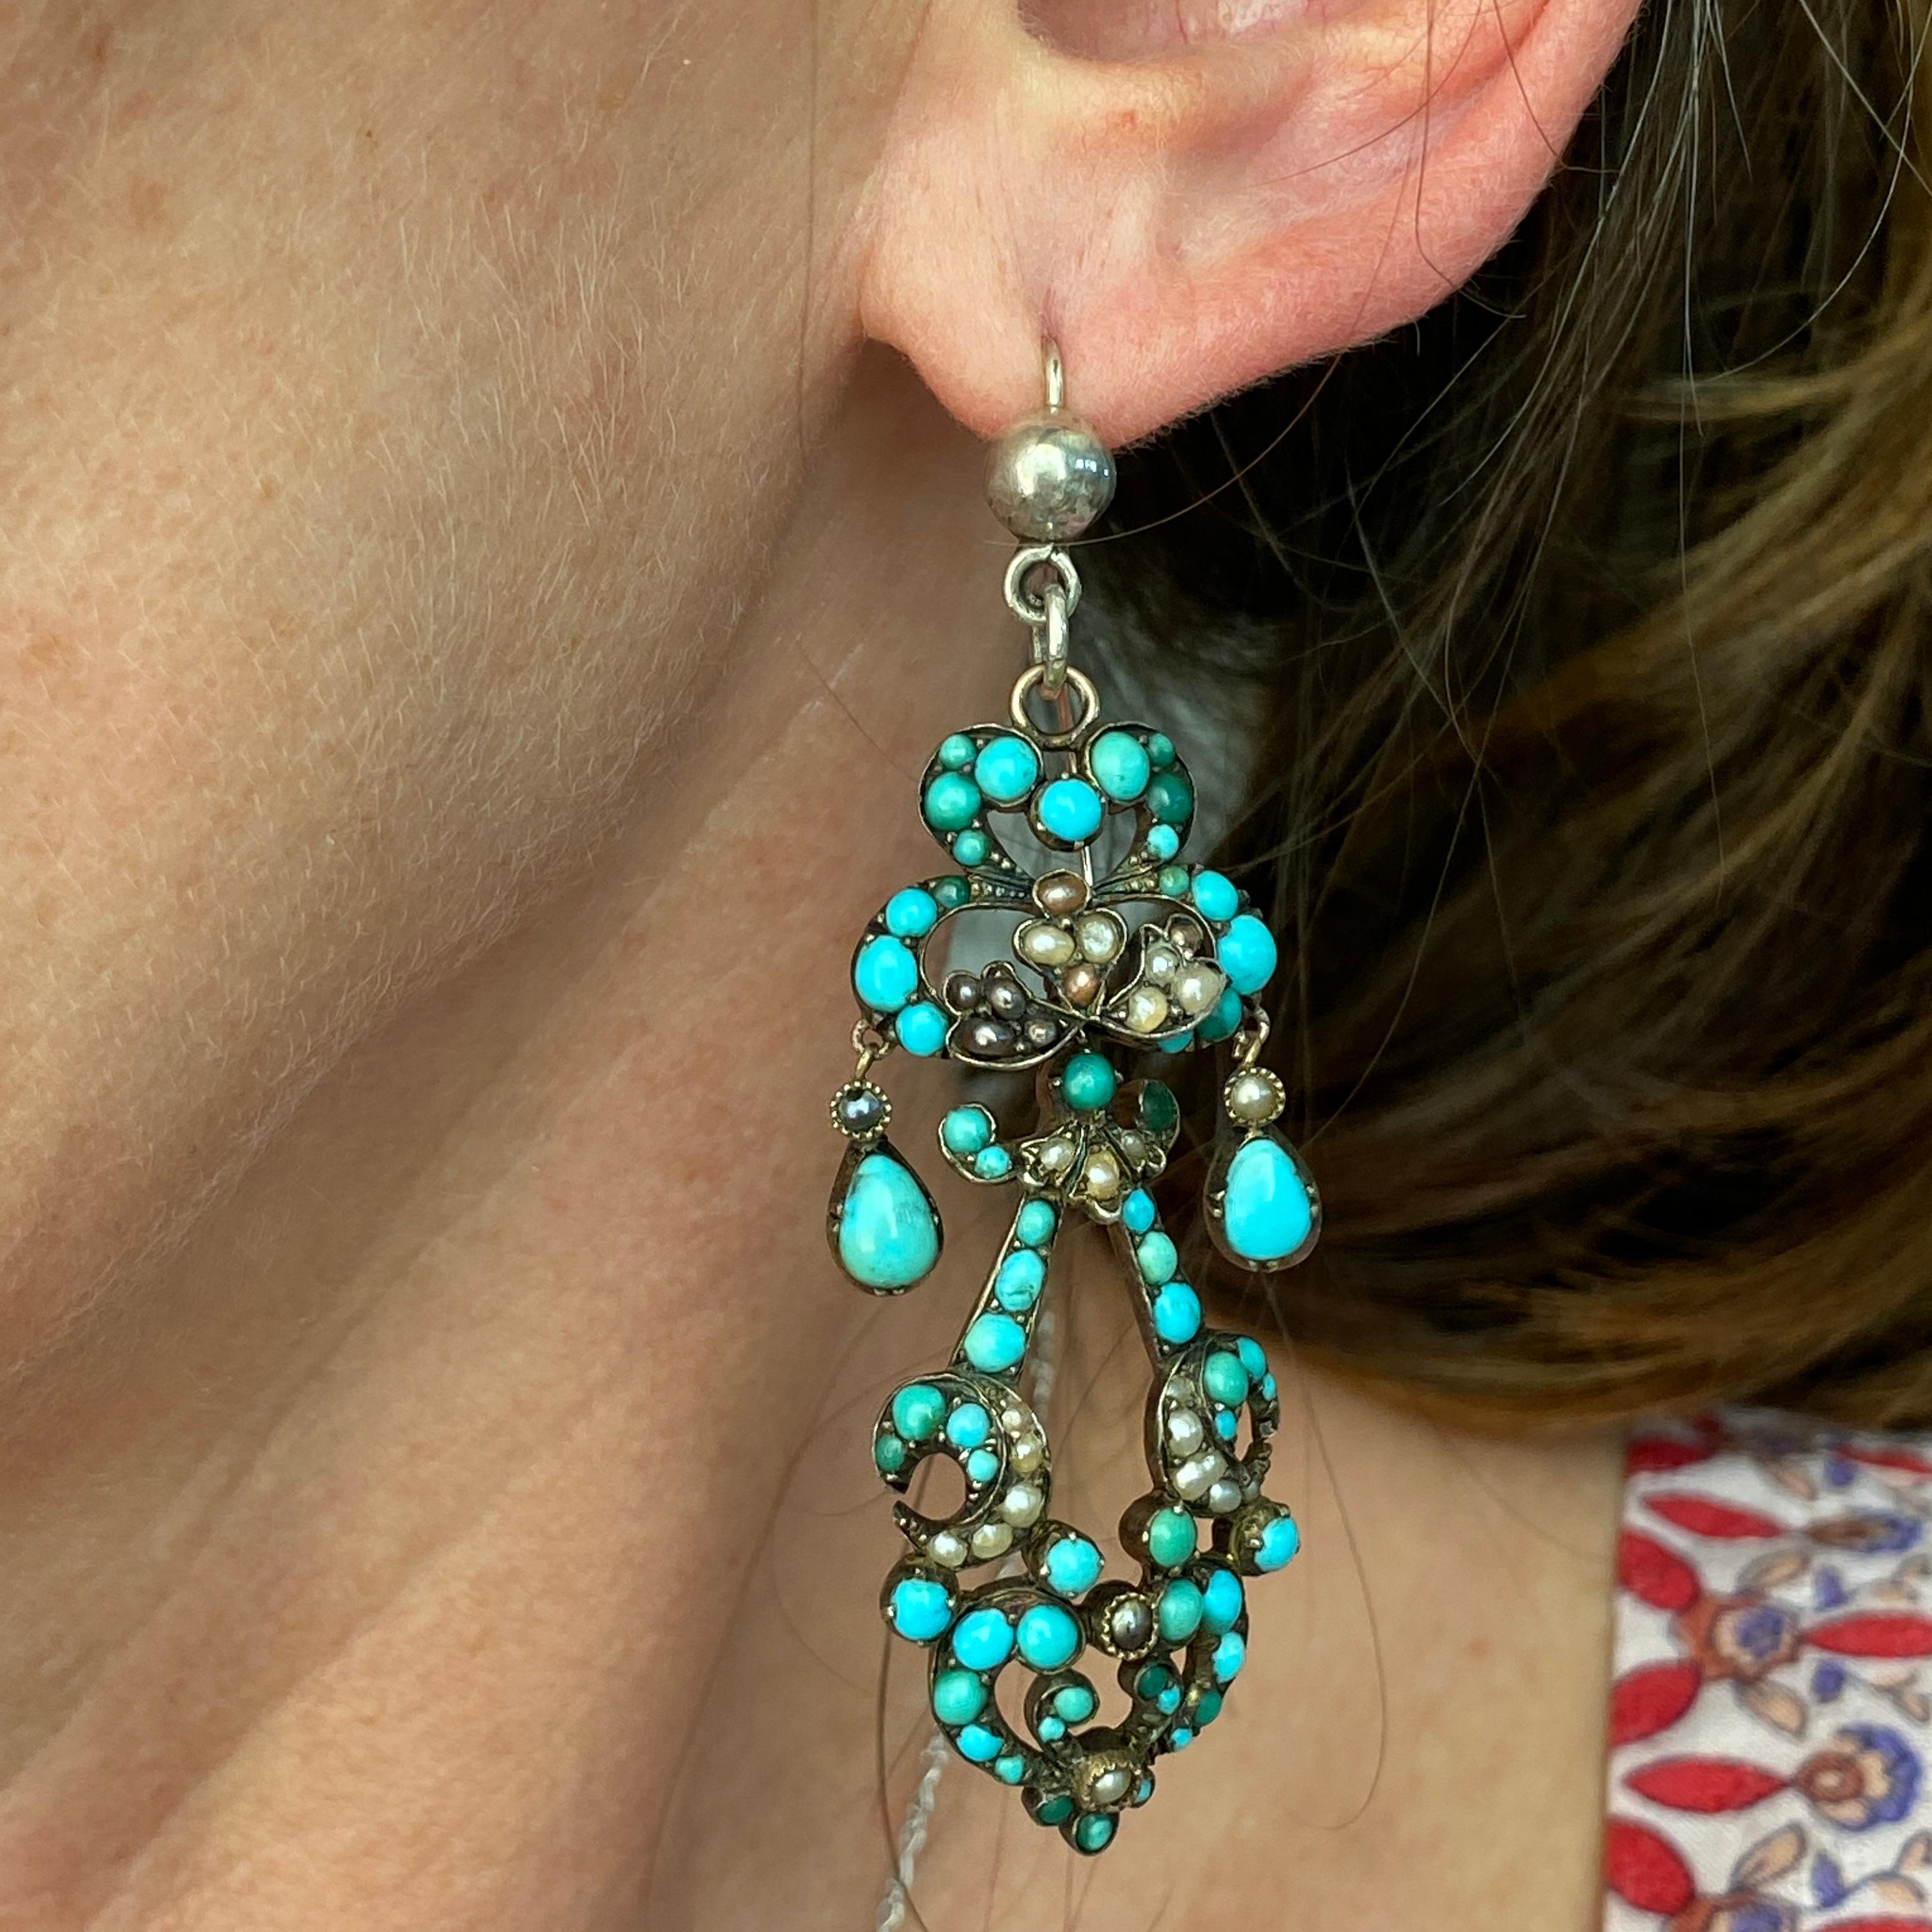 Details:
Stunning Georgian turquoise, seed pearl and silver chandelier earrings. They are articulated, and have lots of movement. The turquoise has a lovely bright blue color. The ear wires were replaced at some time along the way. One of the tear